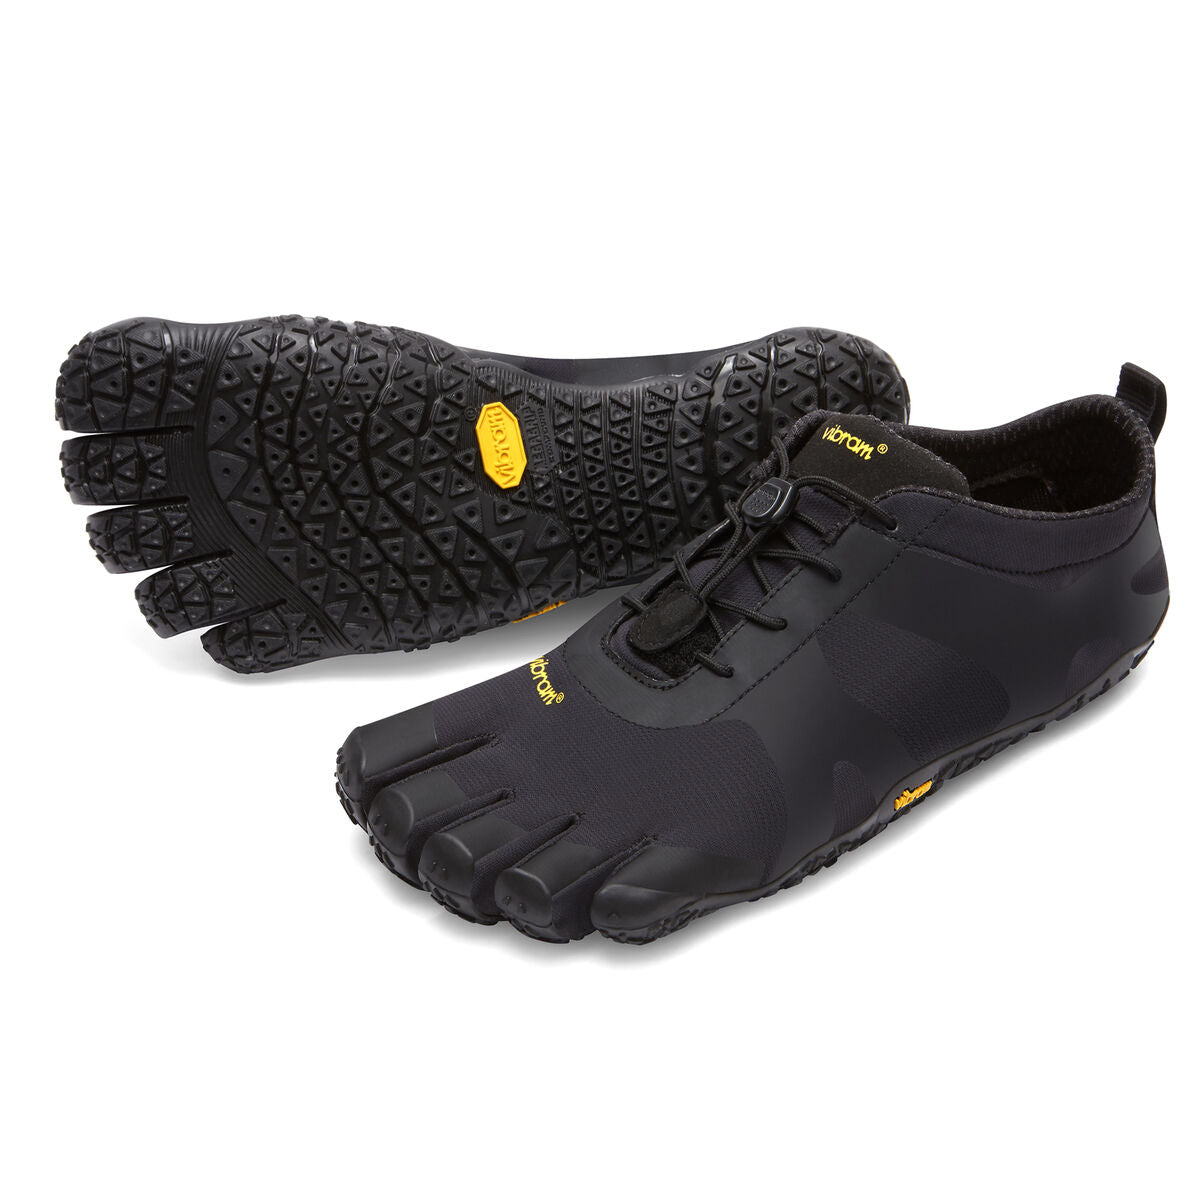 Women's Vibram Five Fingers V-Alpha Hiking Shoe in Black from the front